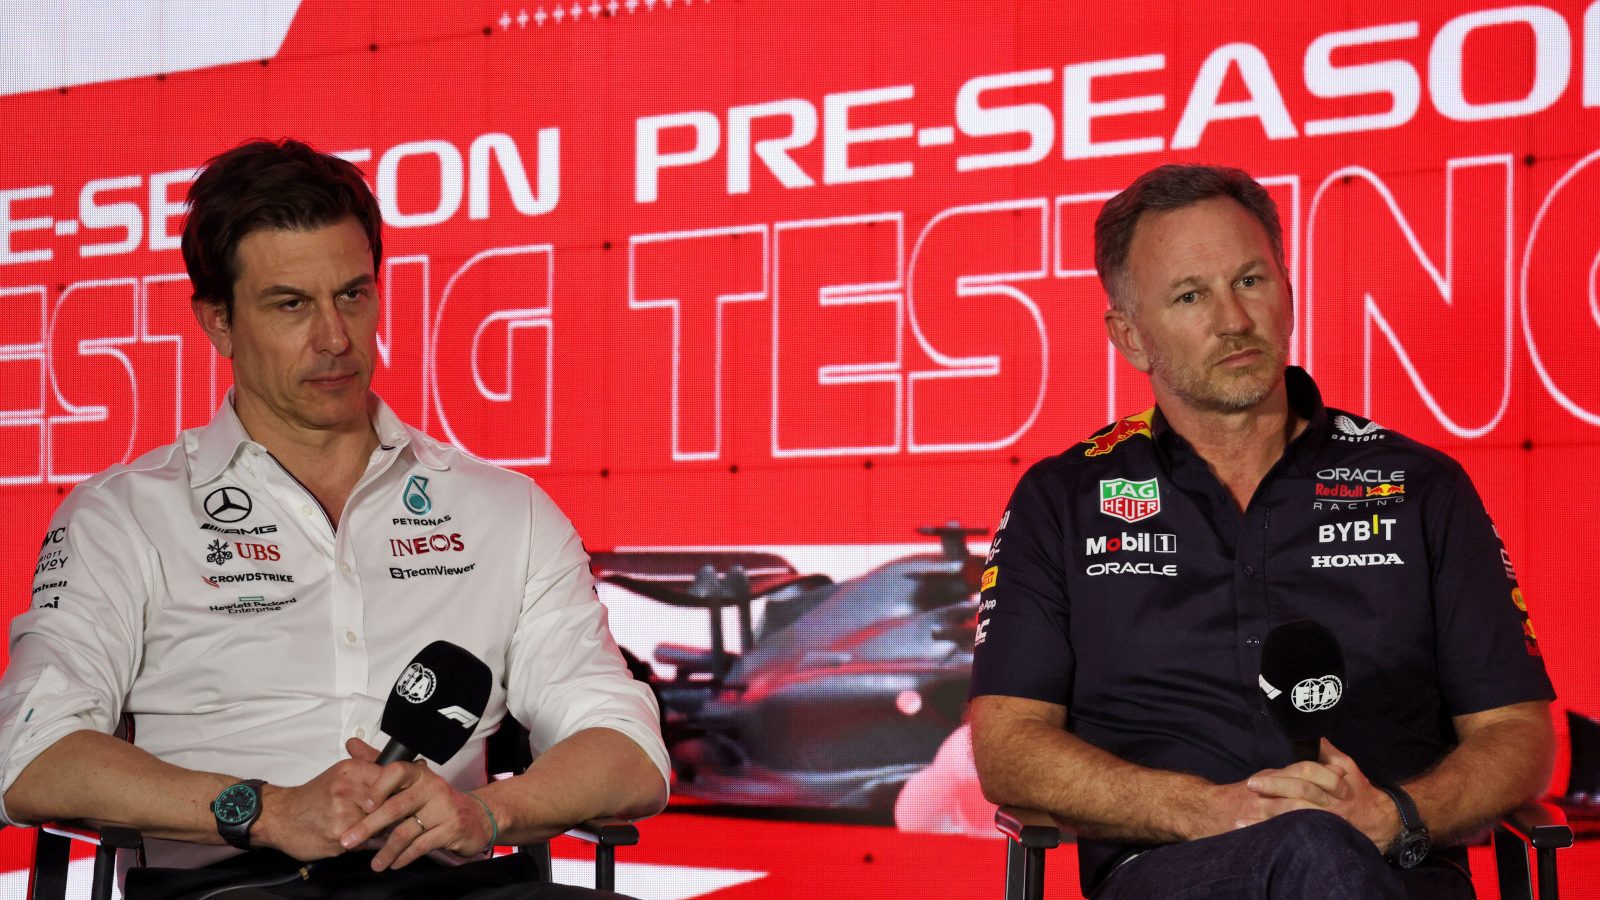 Toto Wolff and Christian Horner looking glum in the pre-season press conference. Bahrain F1 February 2023